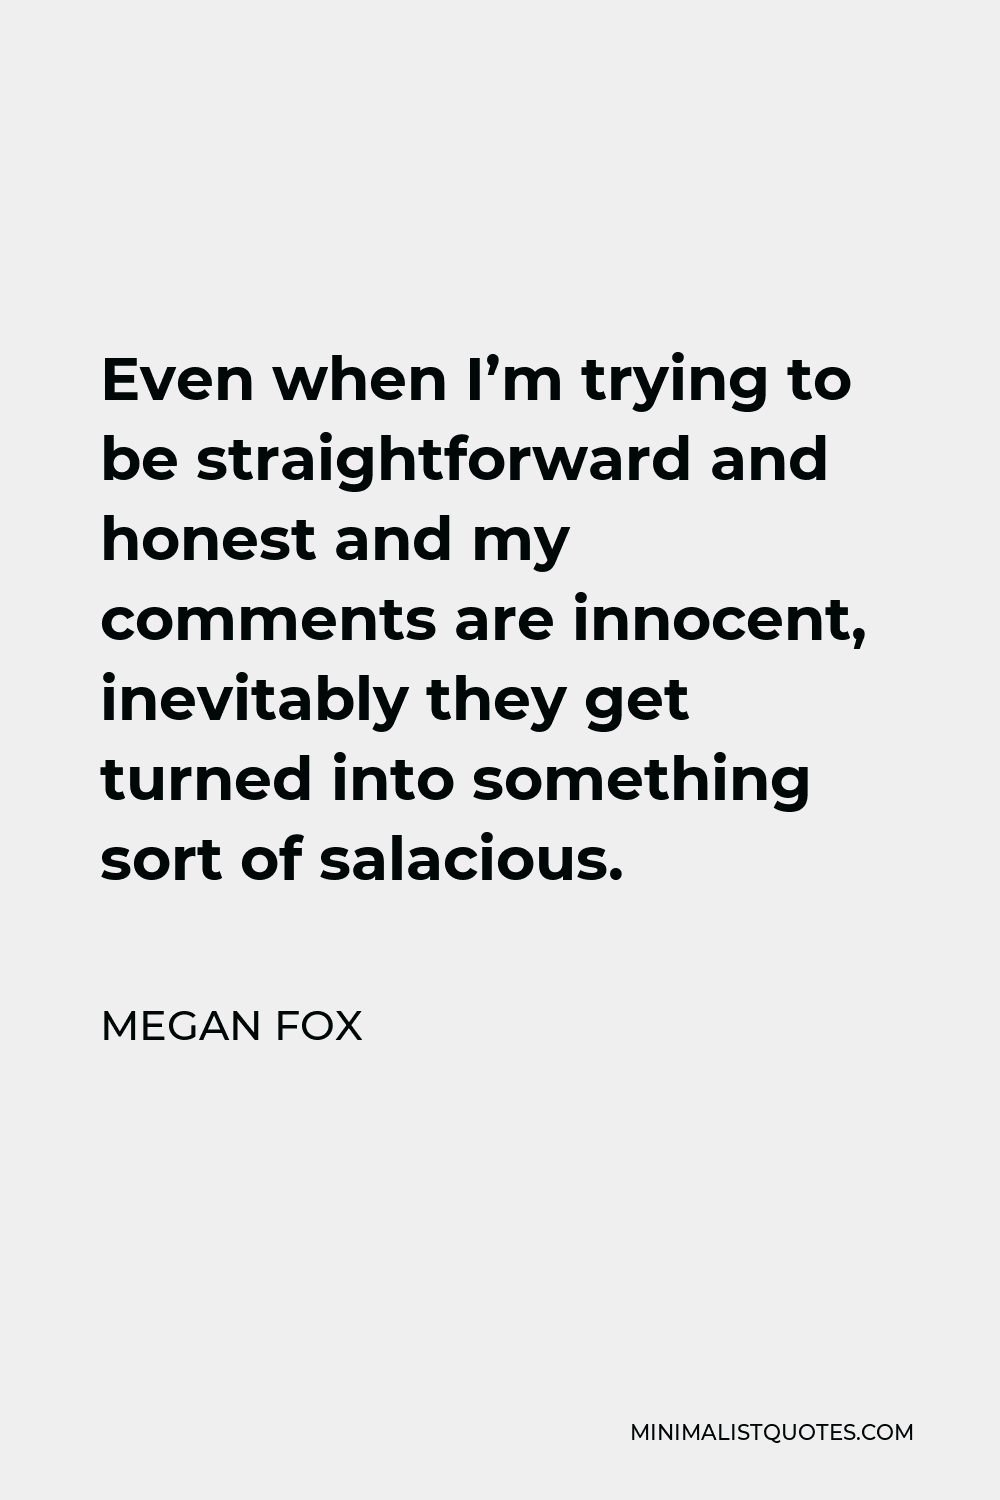 Megan Fox Quote - Even when I’m trying to be straightforward and honest and my comments are innocent, inevitably they get turned into something sort of salacious.